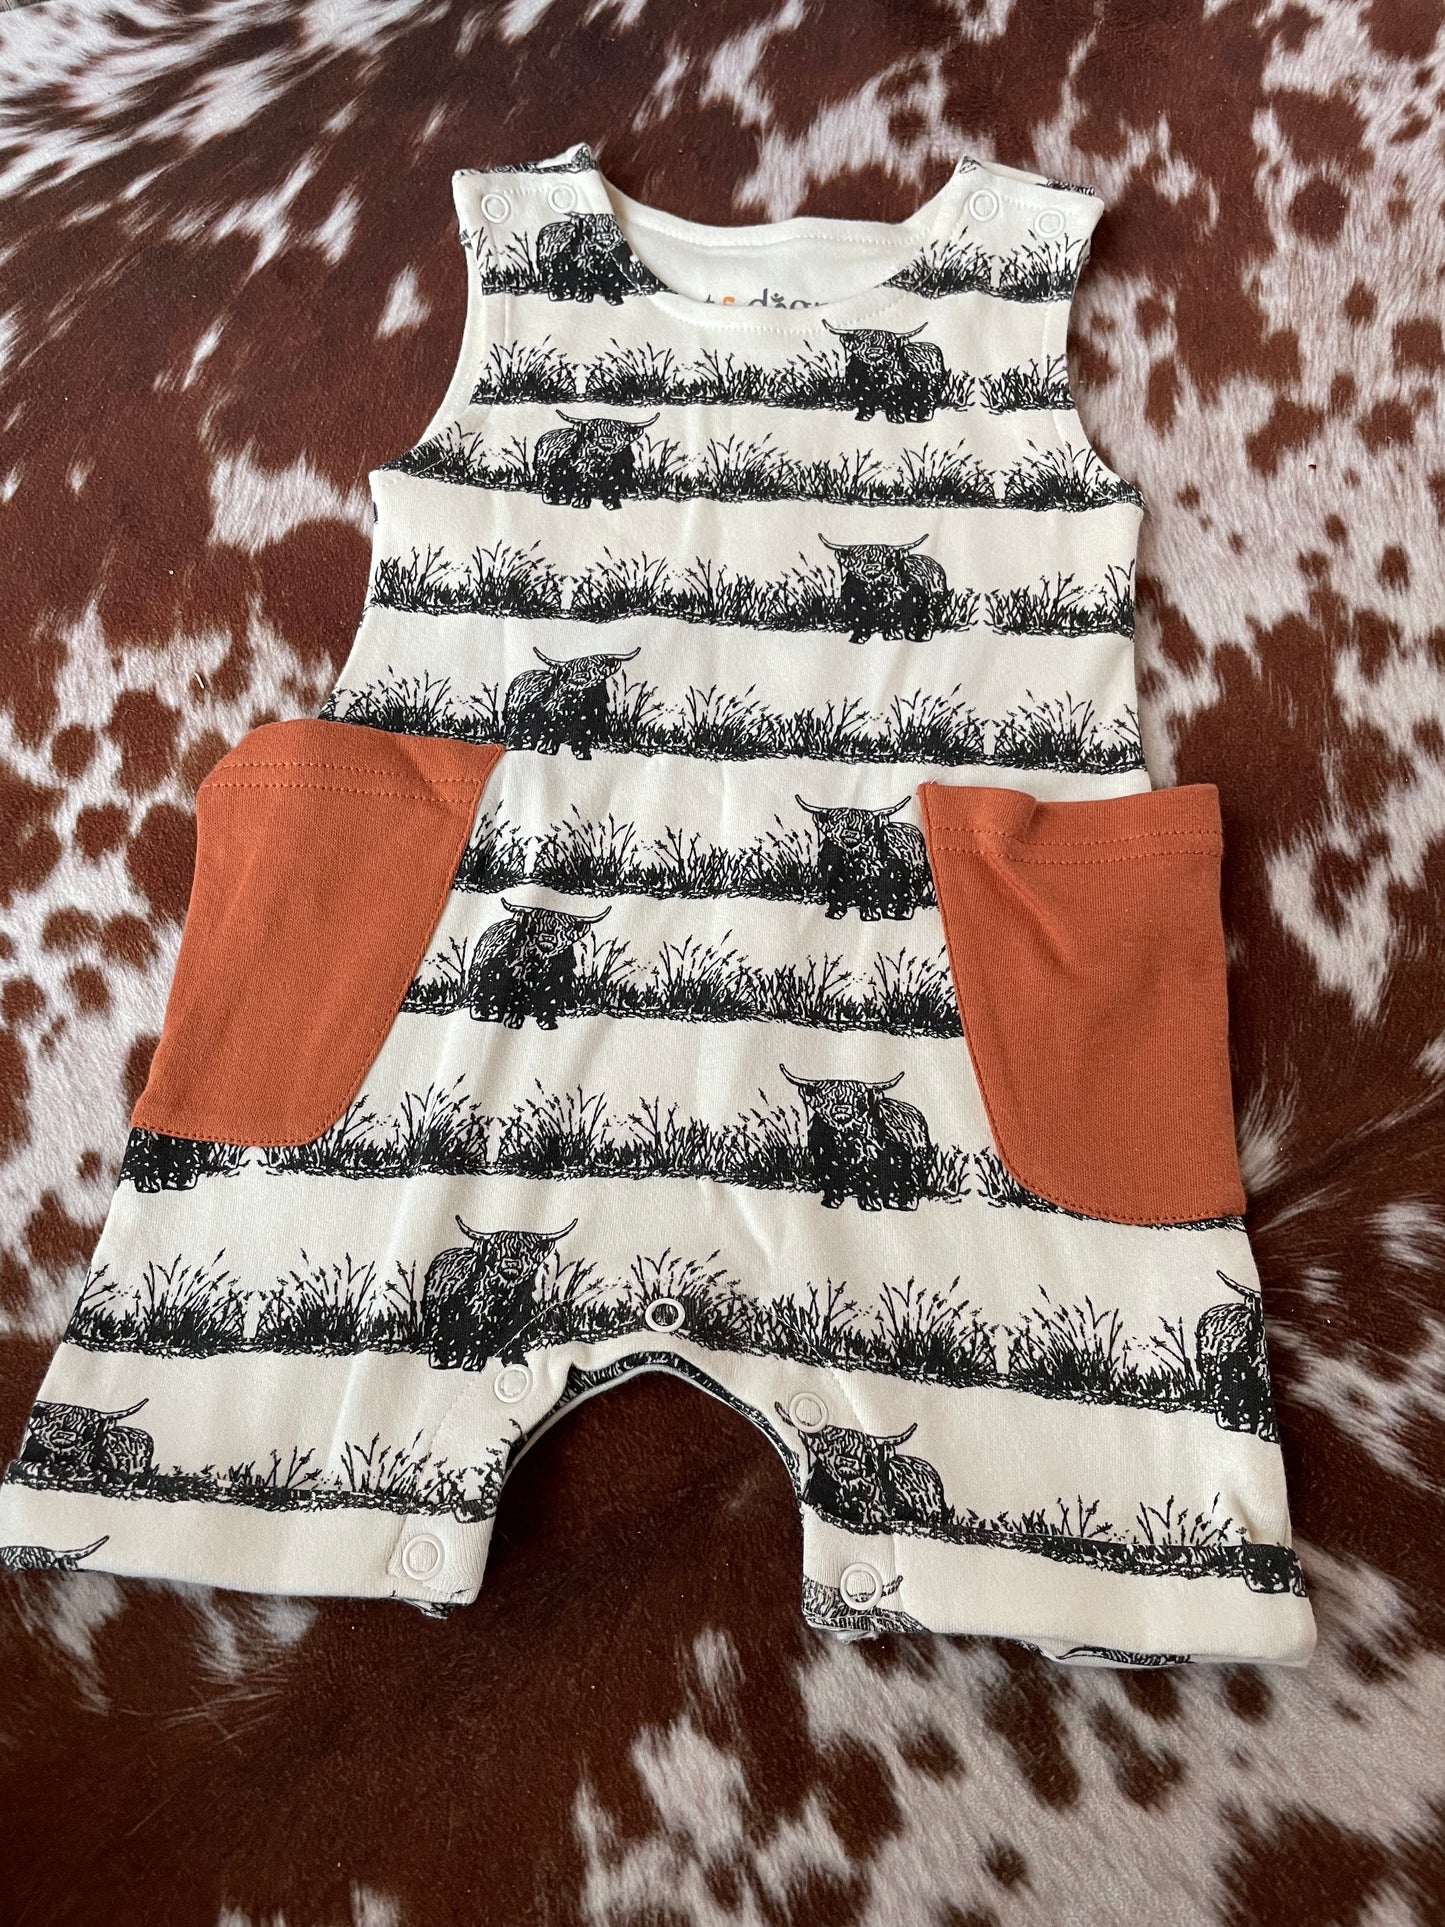 Highland Baby Jumper / overall